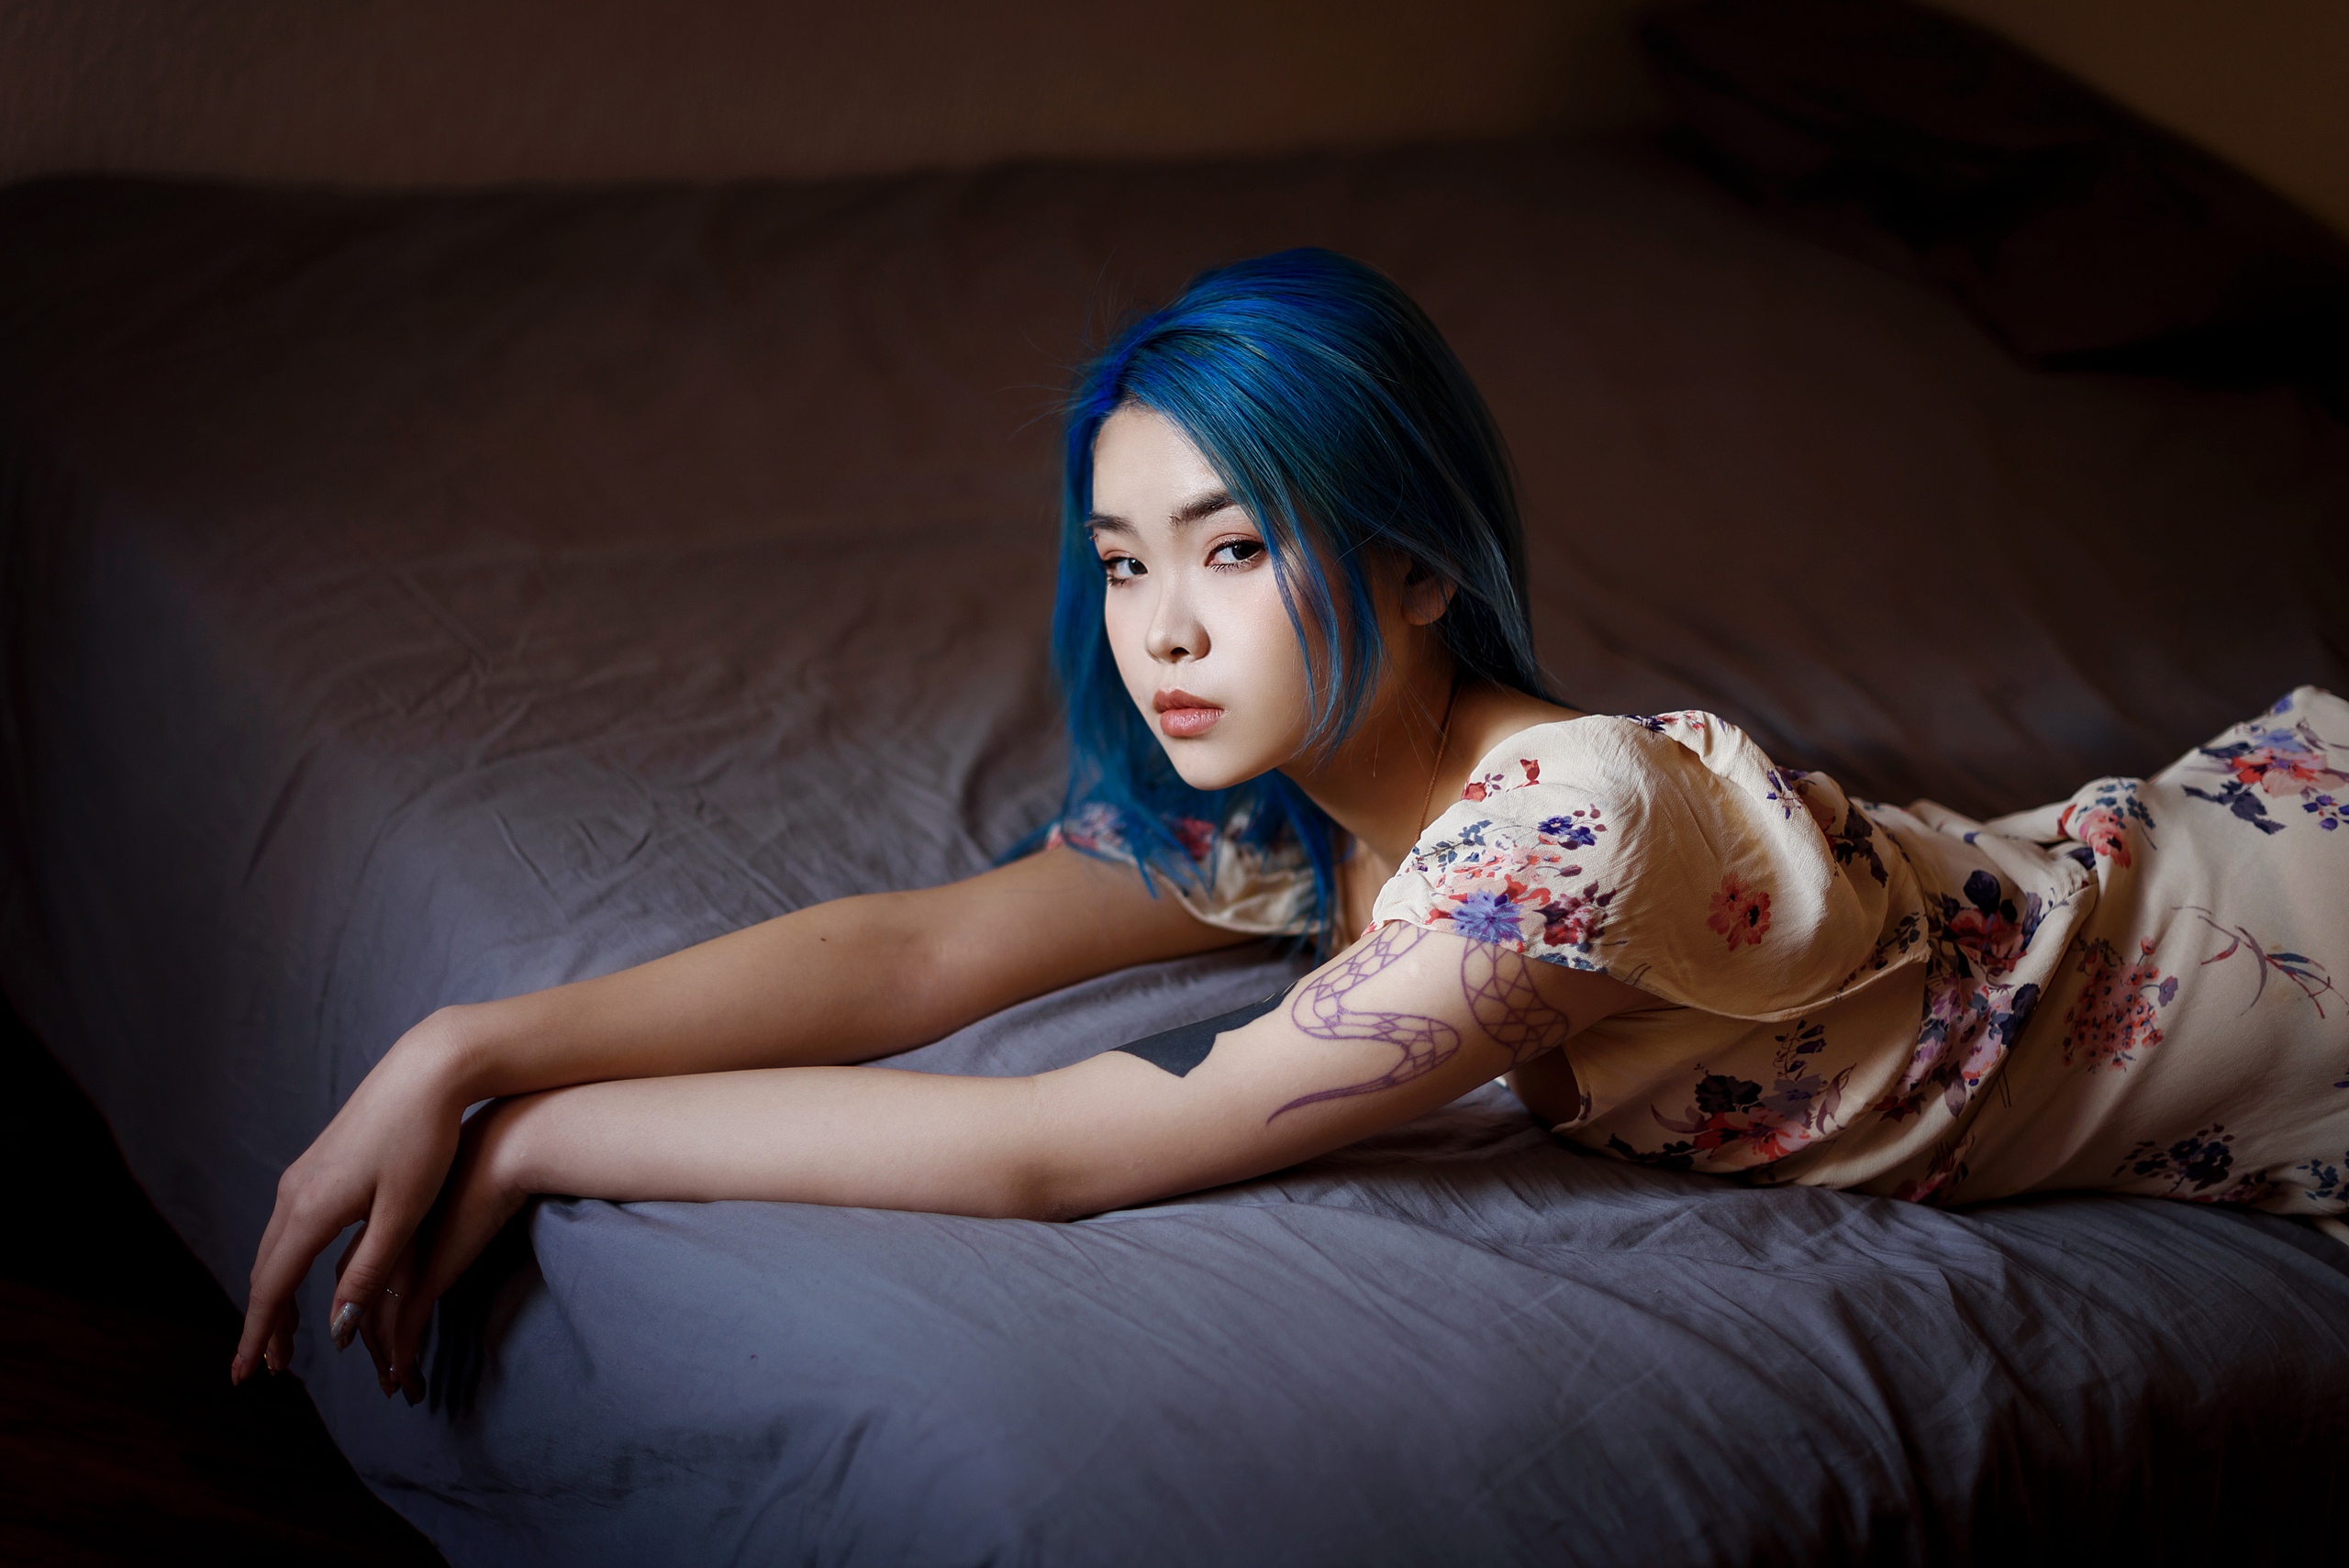 Women Model Asian Blue Hair Dyed Hair Looking At Viewer Pierced Eyebrow Pink Lipstick Dress In Bed D 2560x1709